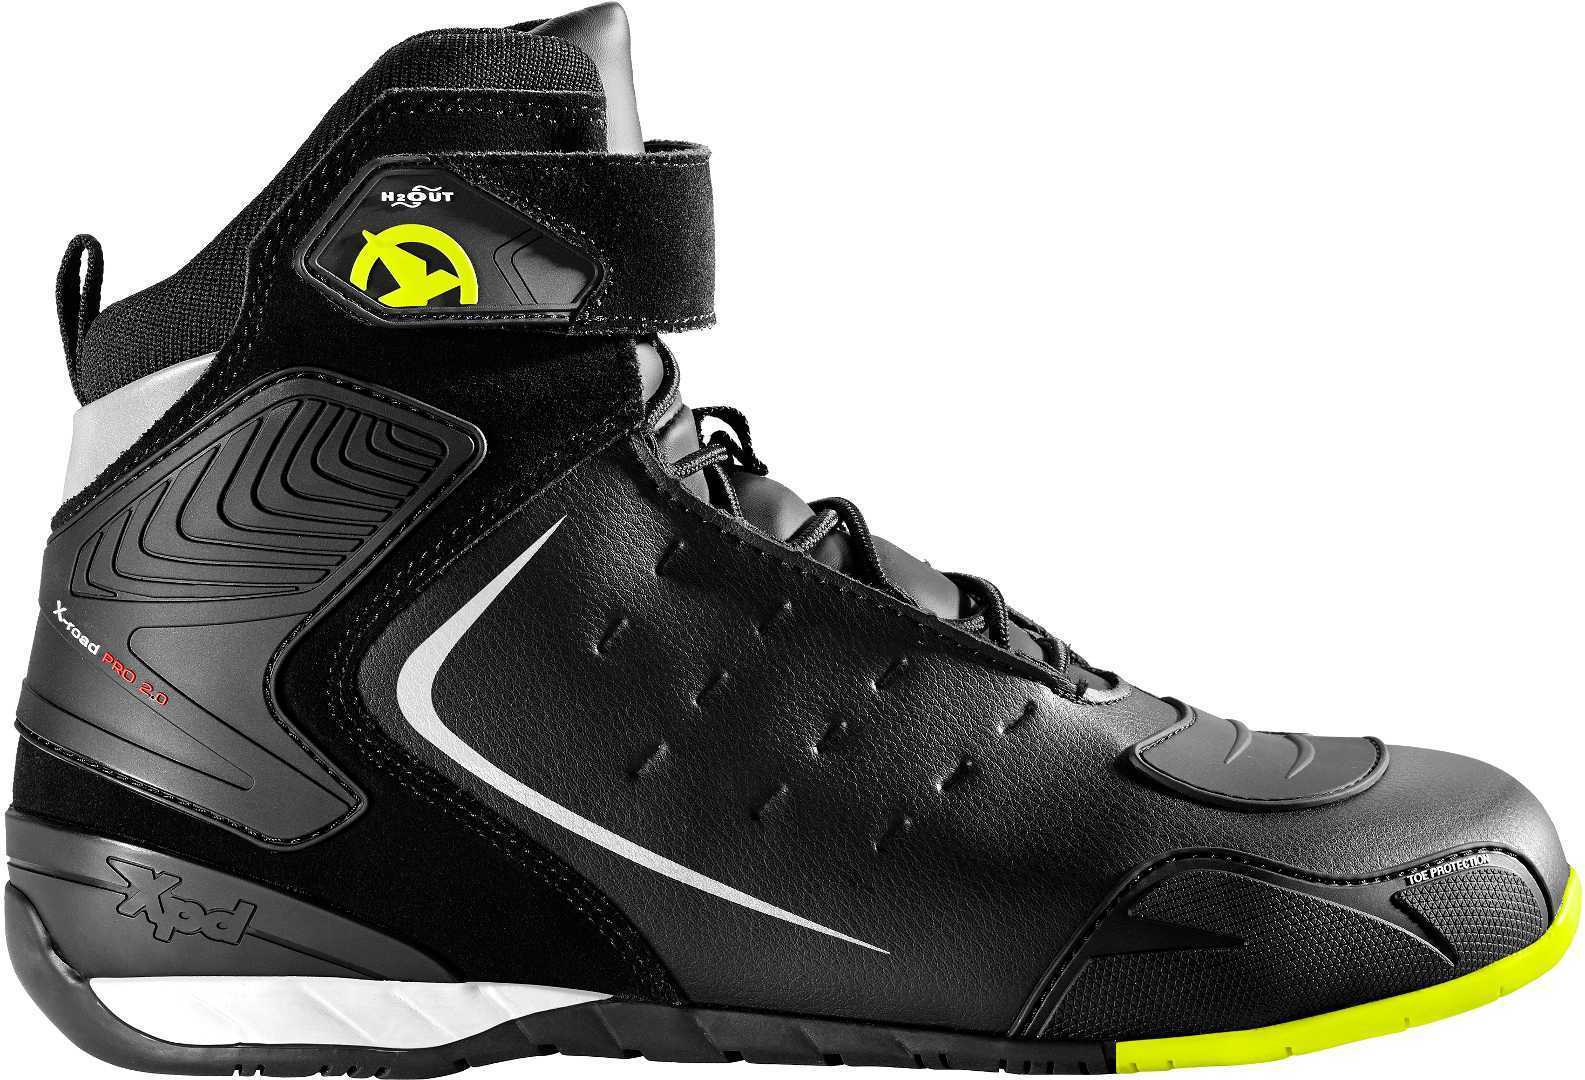 Image of EU XPD X-Road H2Out Jaune Fluo Chaussures Taille 45